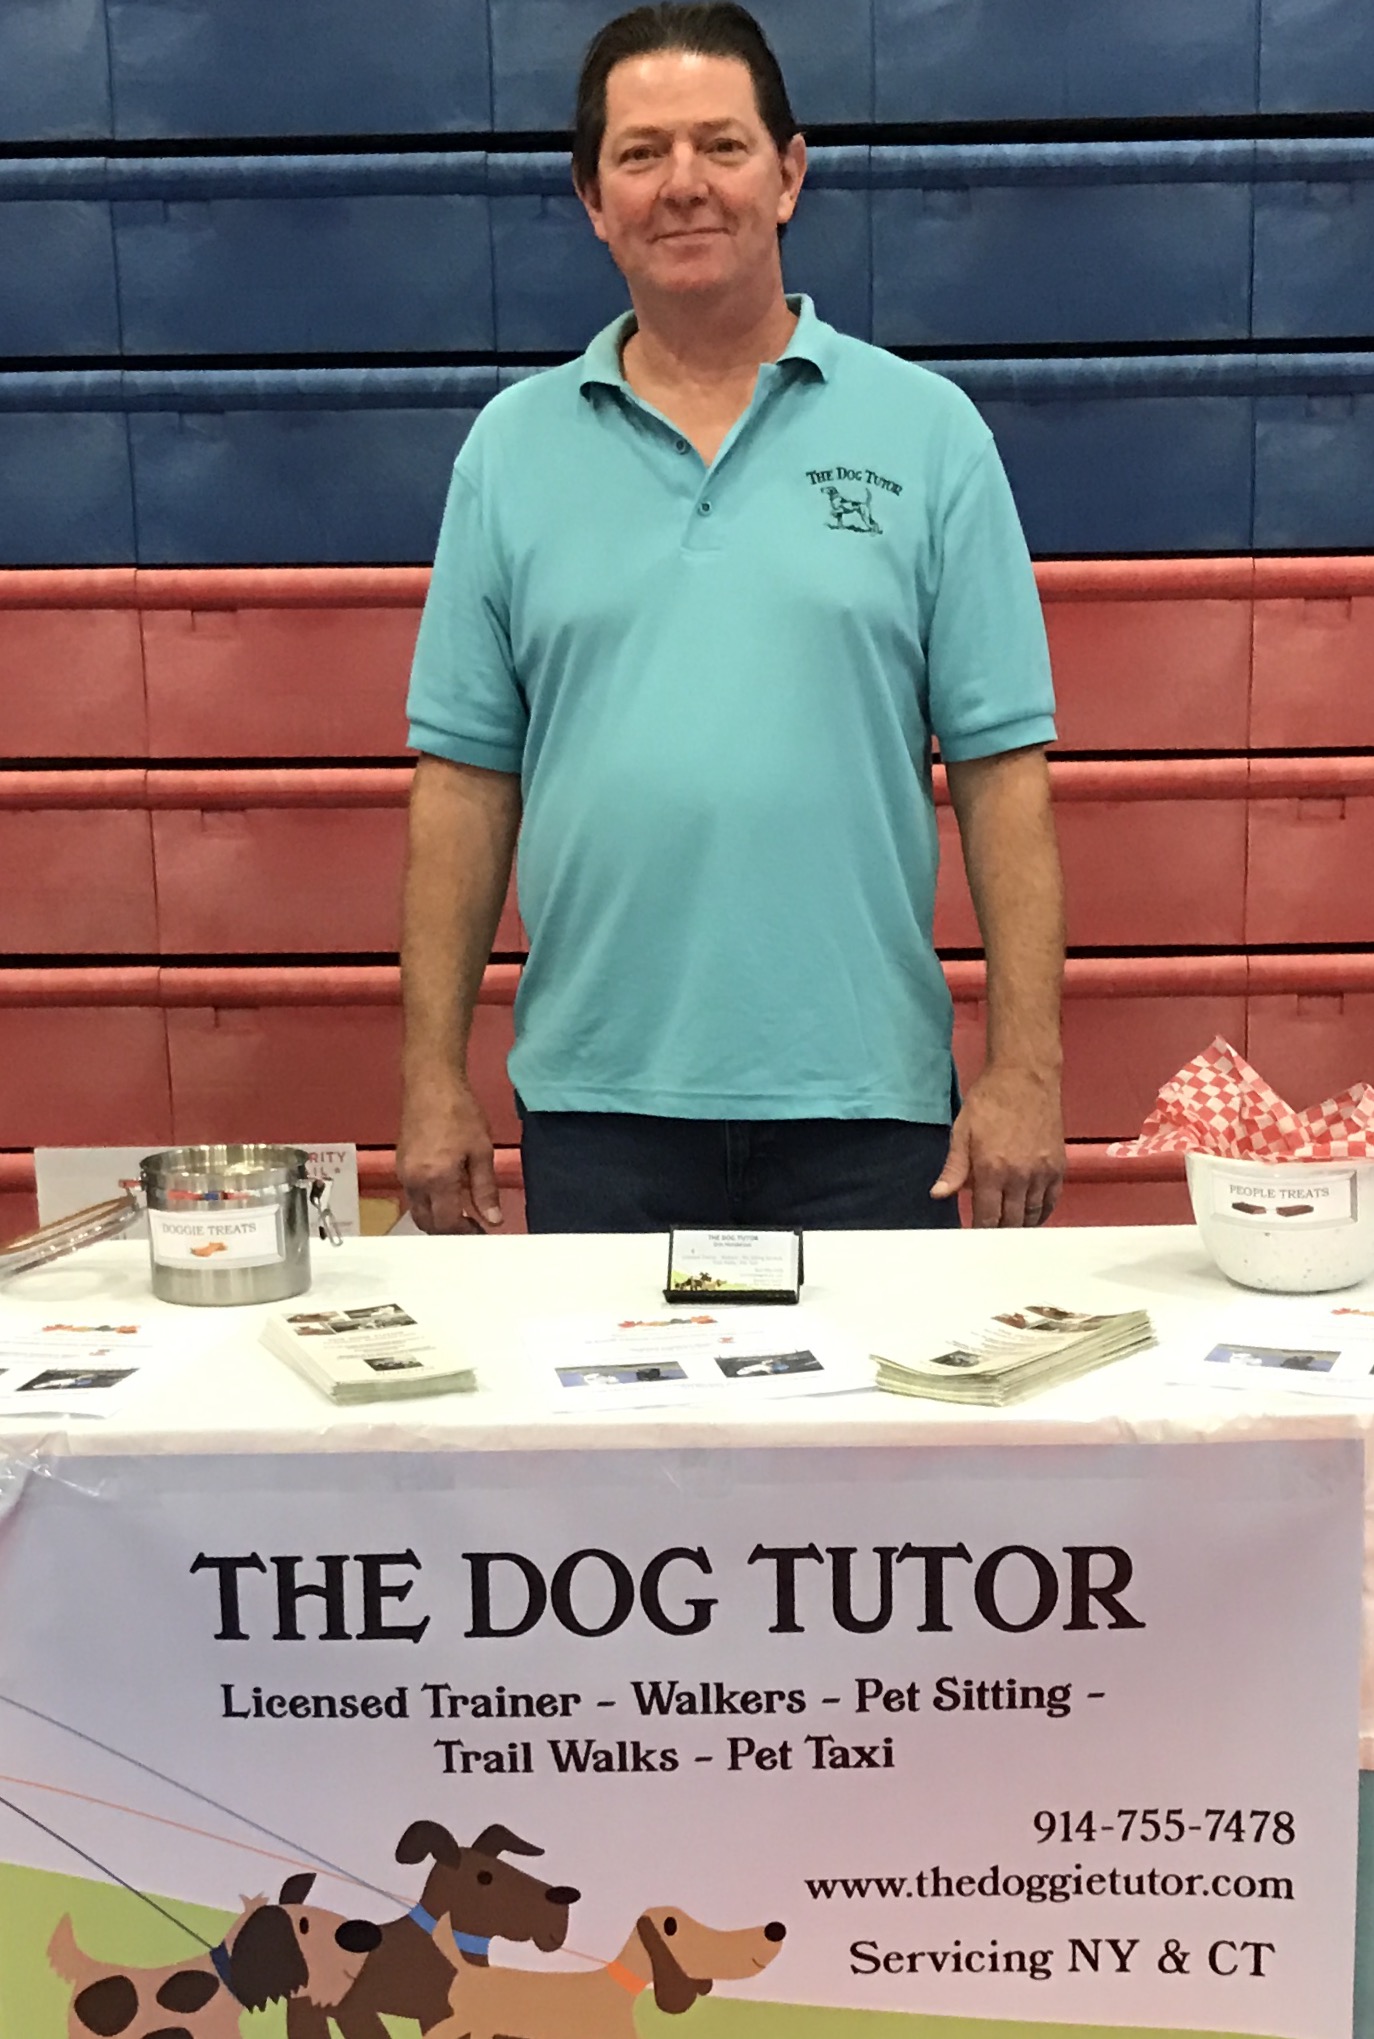 The Dog Tutor at that PAL Pet Expo in Danbury CT